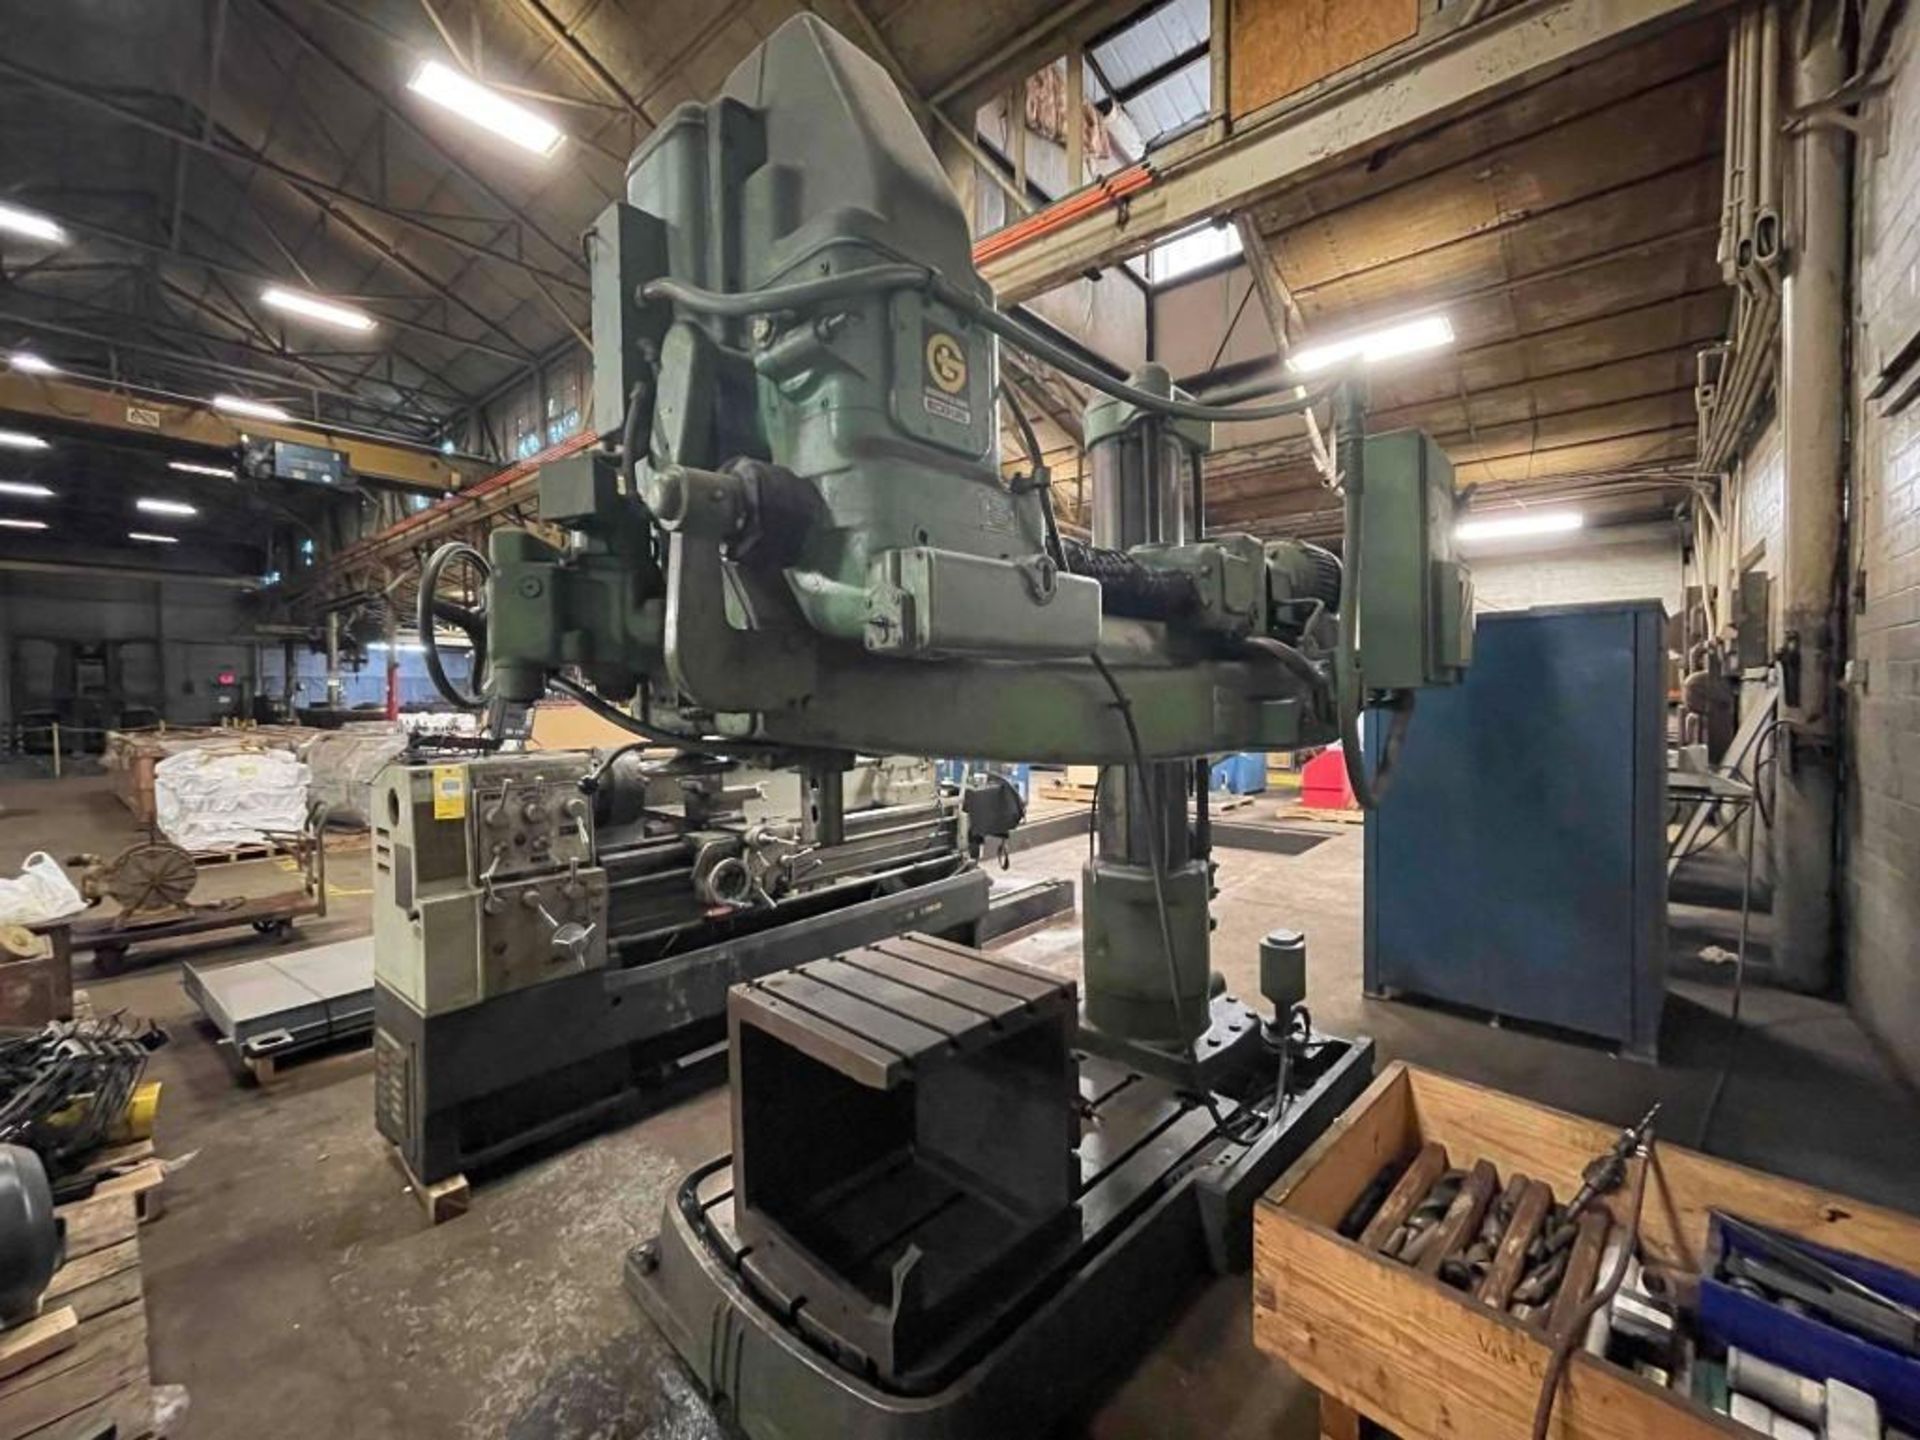 4' 13" Giddings & Lewis Brickford Chipmaster Radial Arm Drill; (OK location) - Image 6 of 14